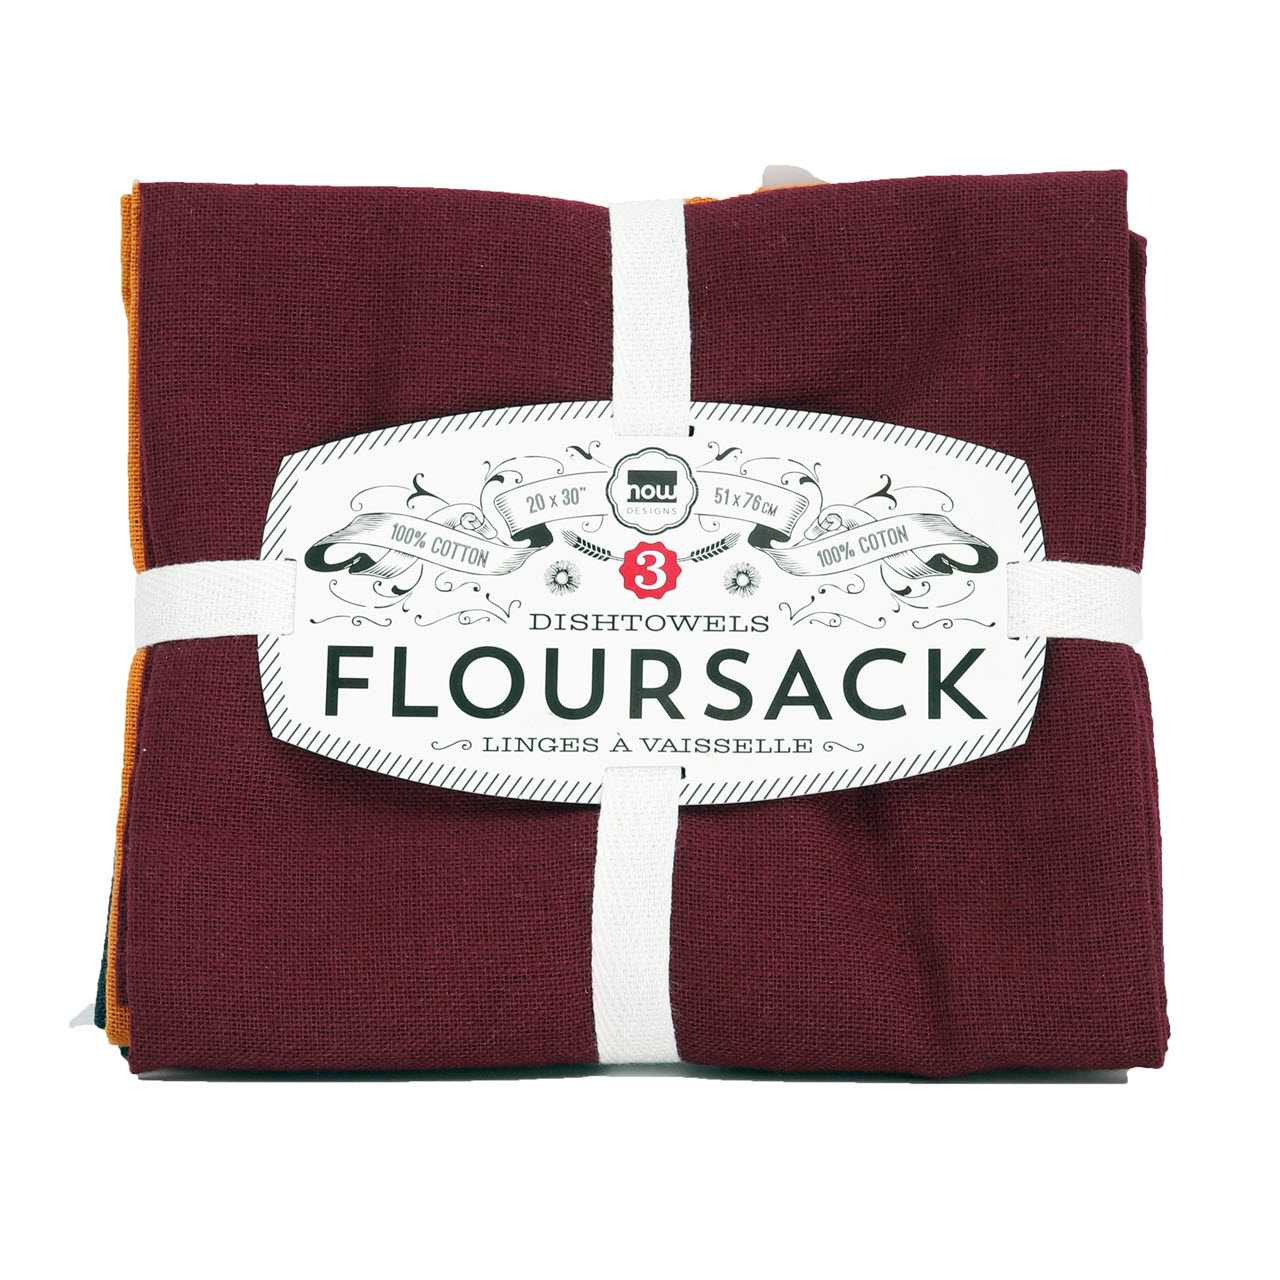 https://cdn11.bigcommerce.com/s-21kj3ntgv1/images/stencil/1280x1280/products/462/2379/Now-Designs-Floursack-Dishtowels-in-Wine-Maize-and-Midnight__34092.1647559176.jpg?c=2